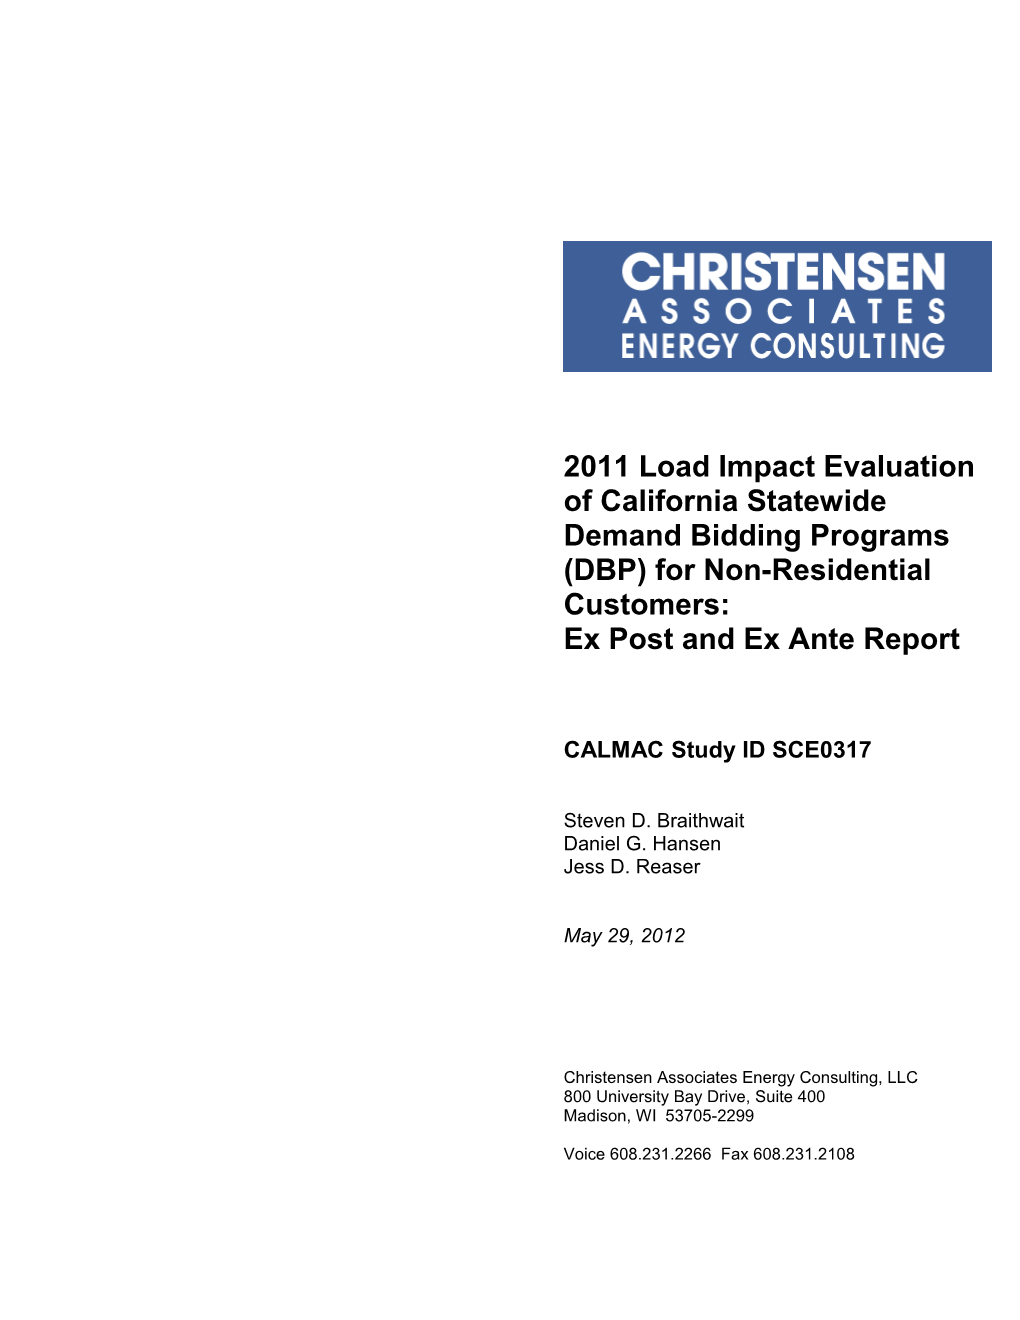 2011 Load Impact Evaluation of California Statewide Demand Bidding Programs (DBP) For